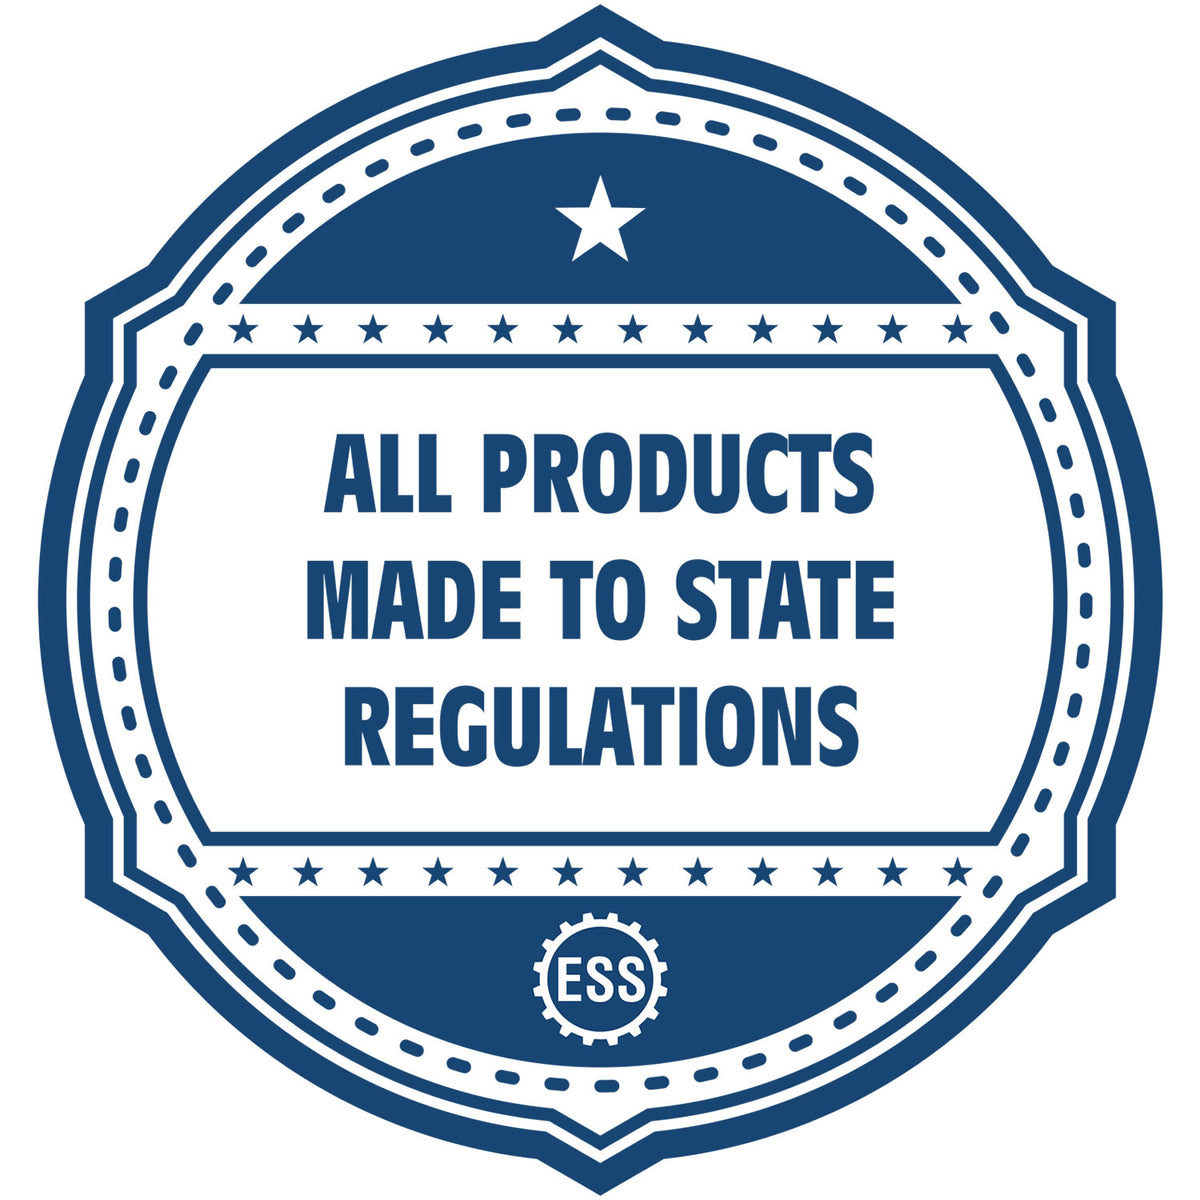 An icon or badge element for the Self-Inking District of Columbia PE Stamp showing that this product is made in compliance with state regulations.